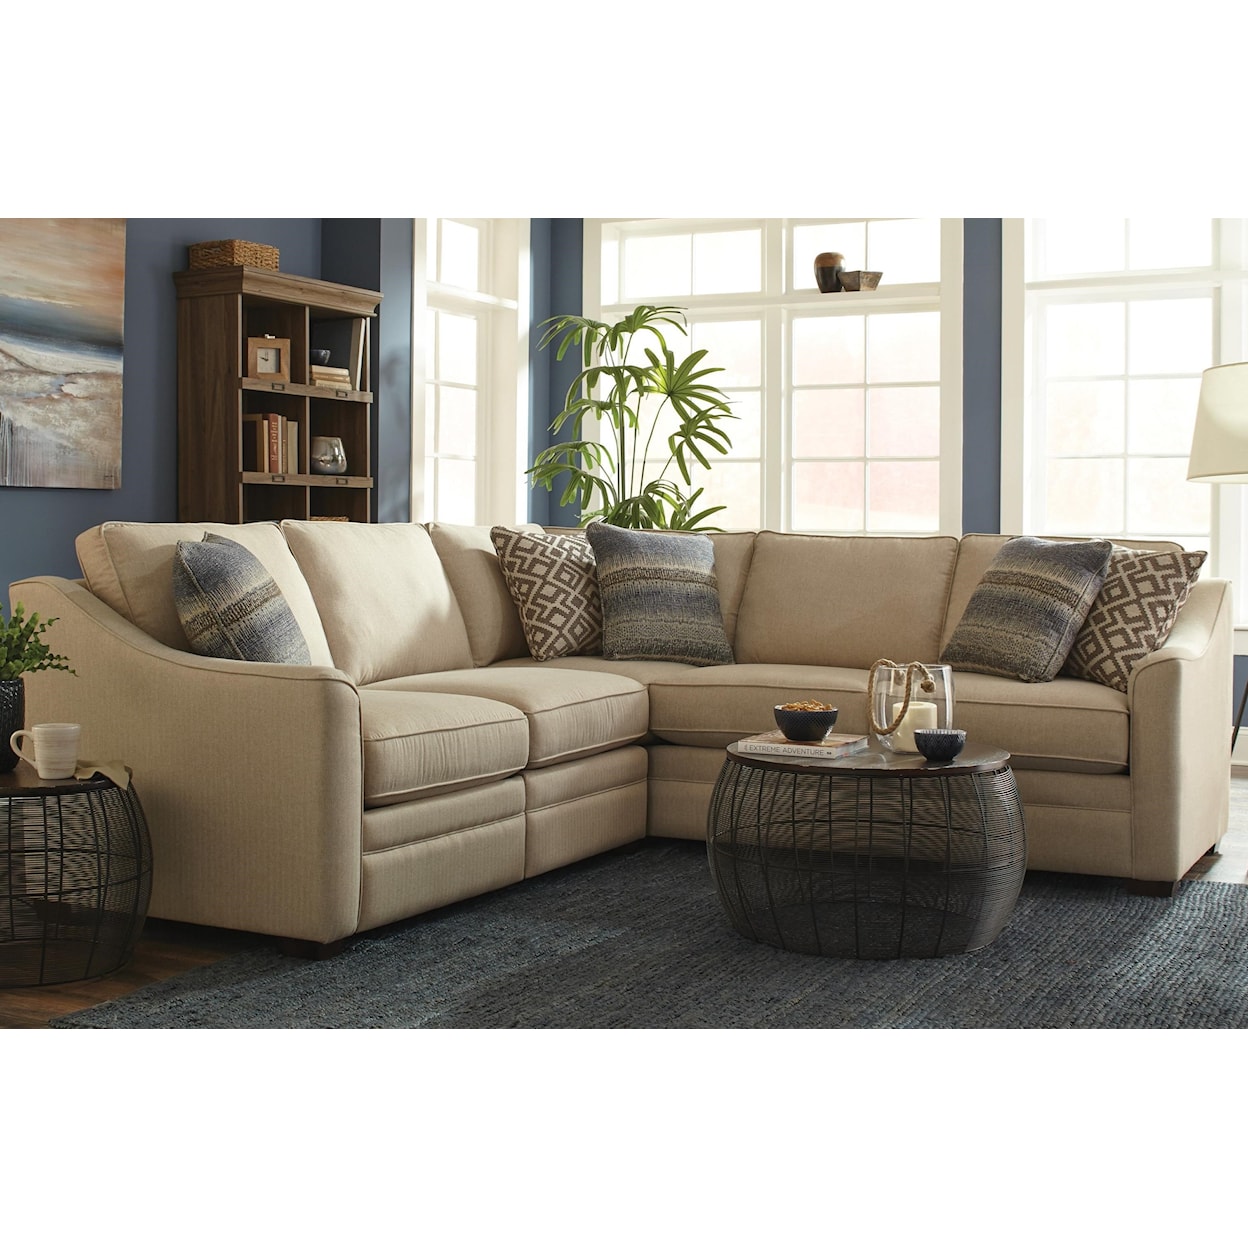 Craftmaster F9 Custom Collection Custom 2 Pc Sectional w/ Recliners